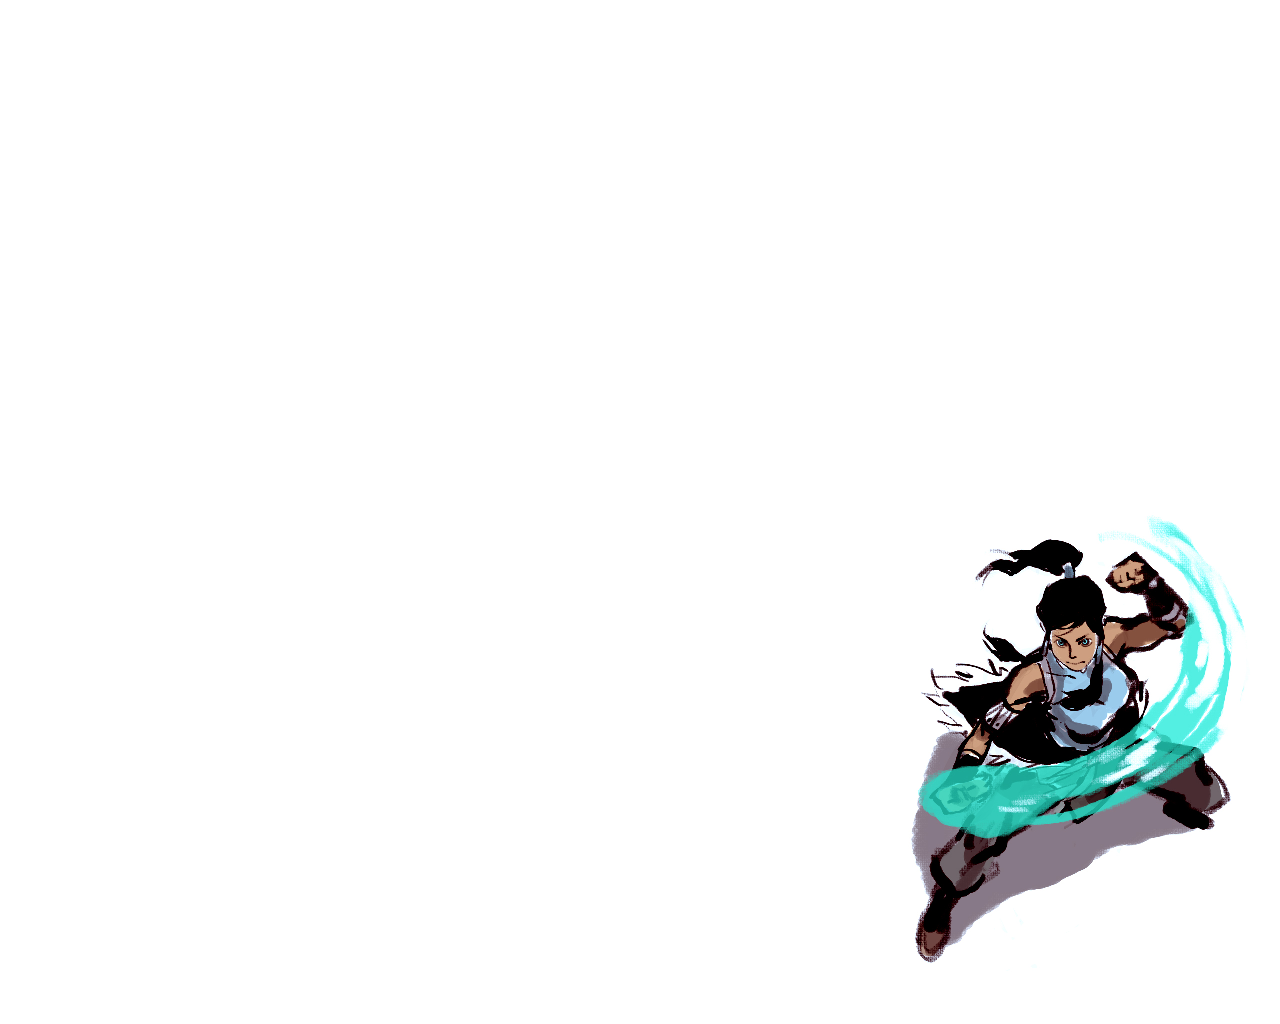 Anime 1280x1024 Avatar: The Last Airbender anime simple background anime girls white white background cyan